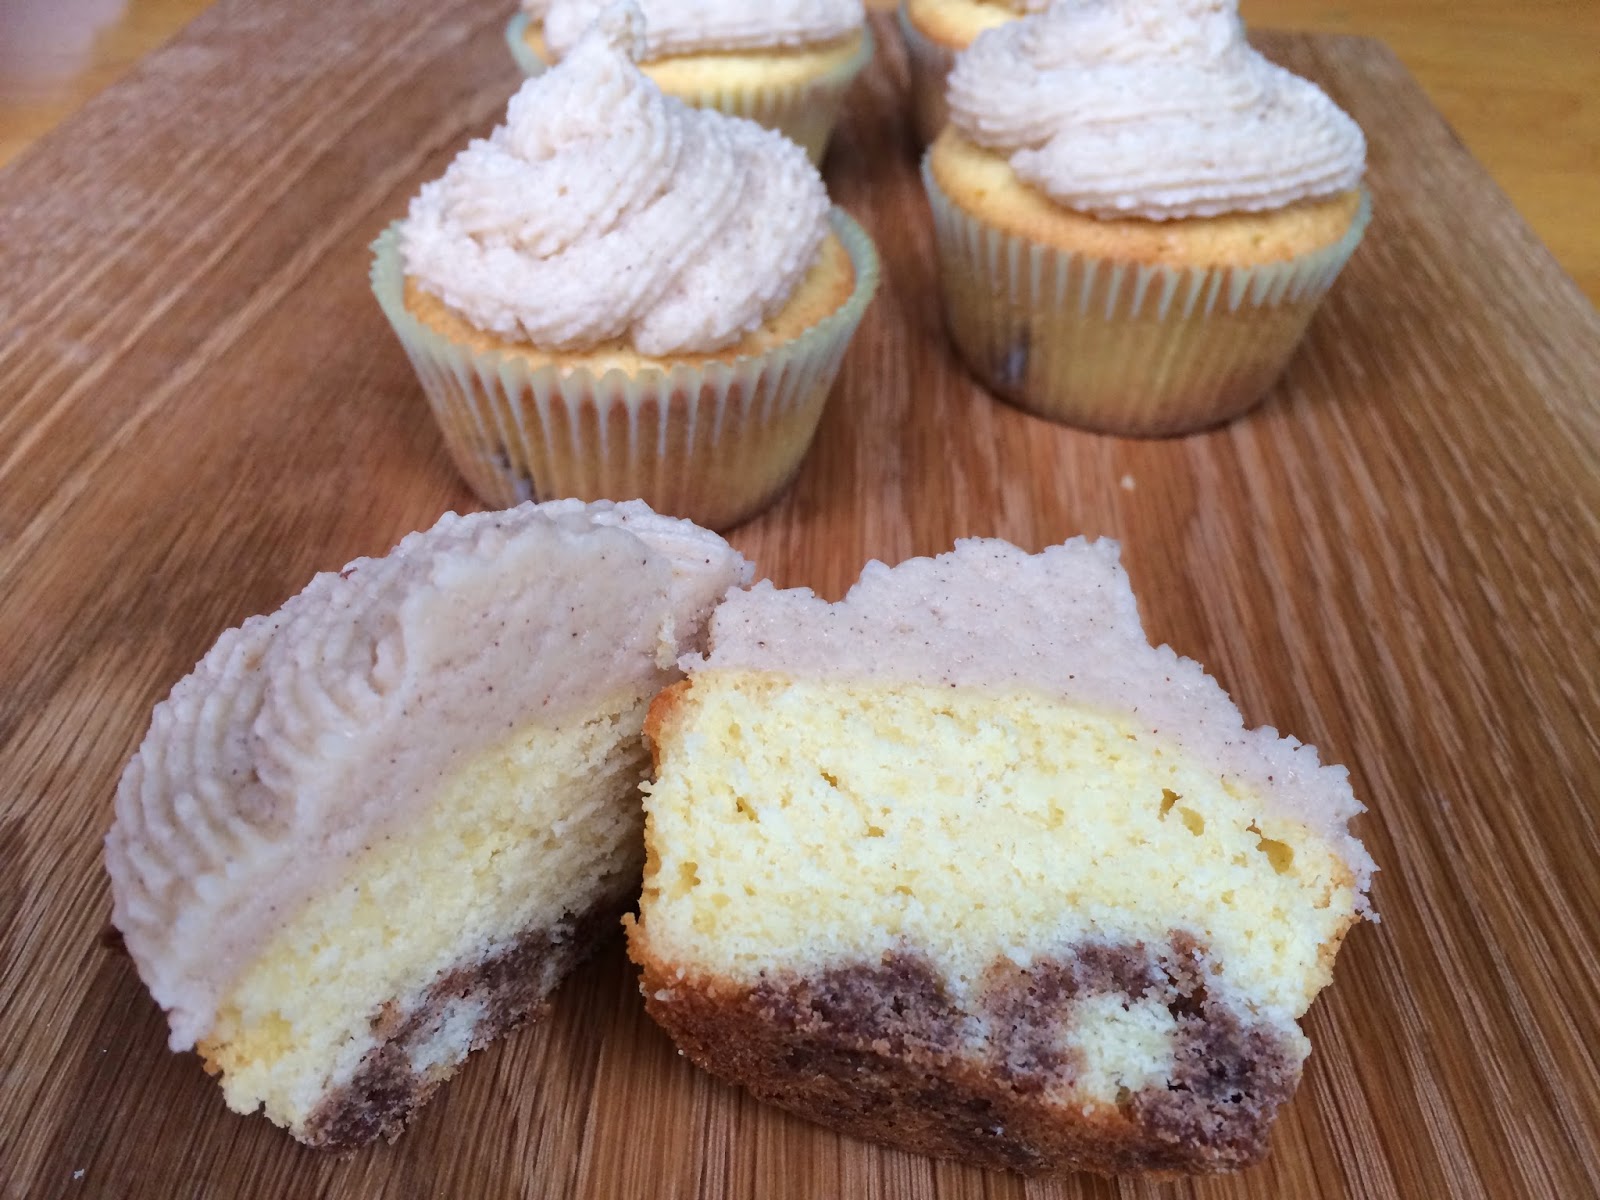 Snickerdoodle Cupcakes with Streusel and Cinnamon Frosting